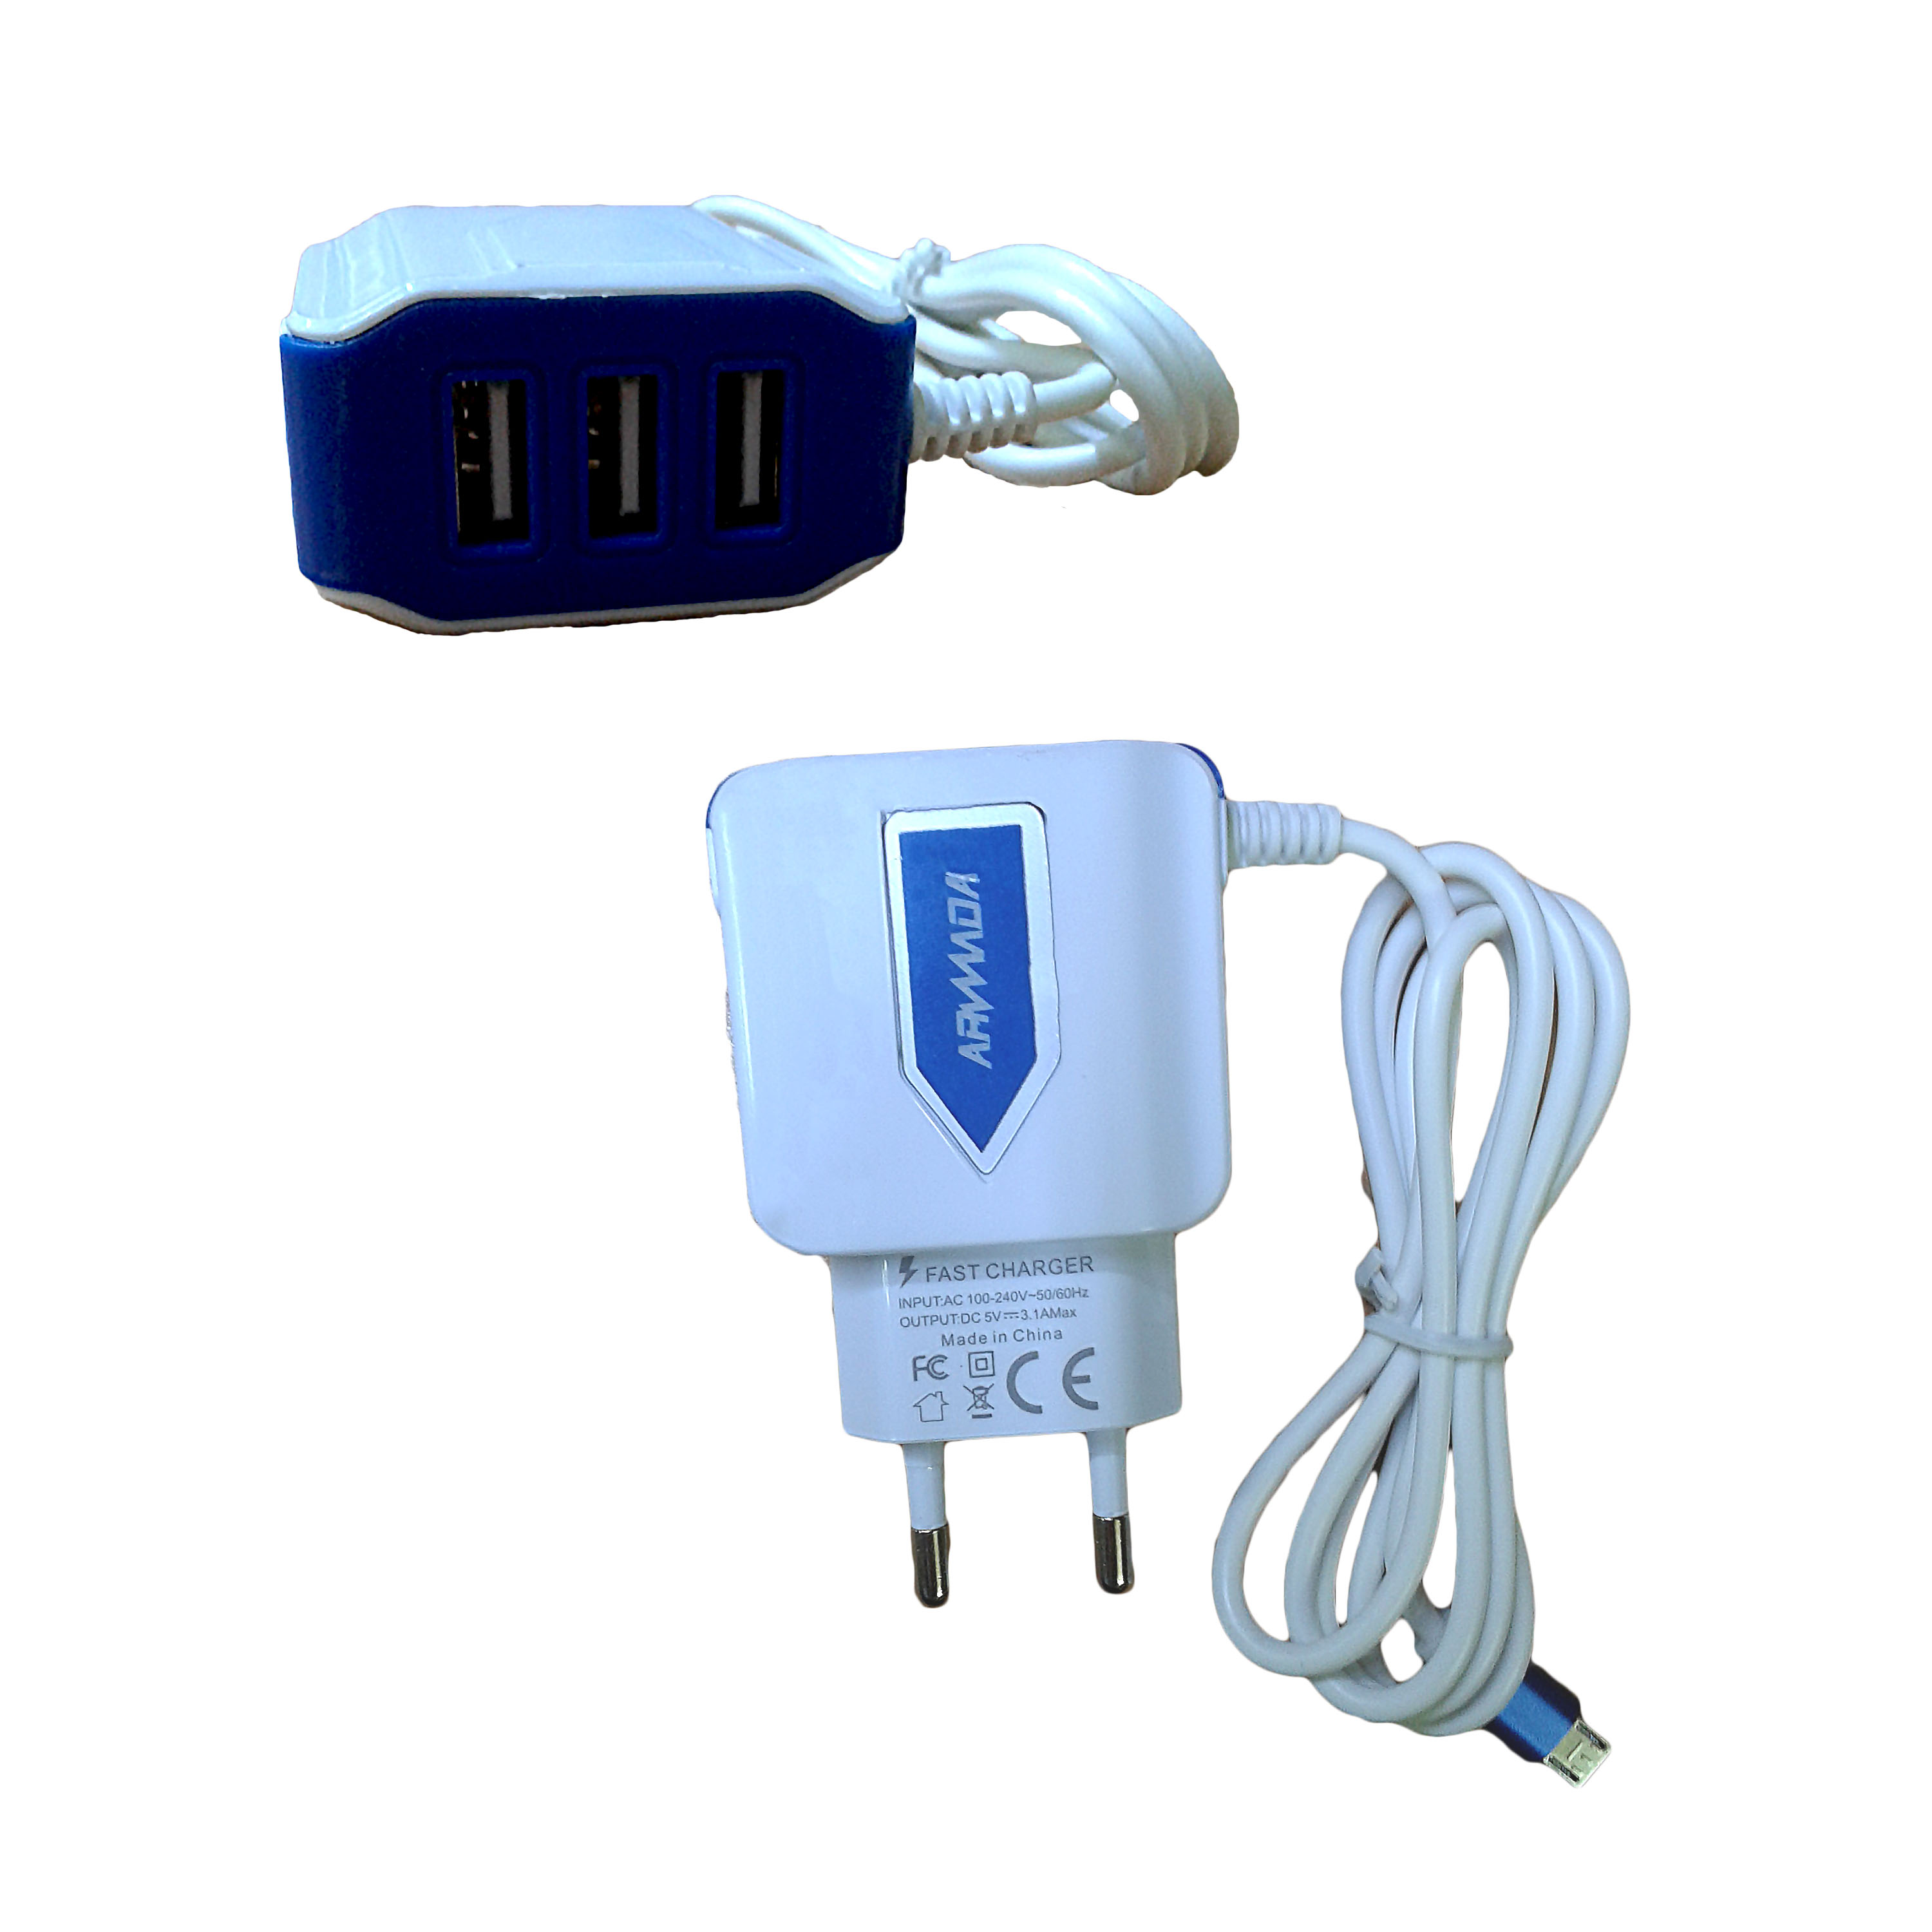 CHARGER 3USB FOR MOBILE&TAB ANDROID -ARMADA C001  مع كبل ,Smartphones & Tab Chargers